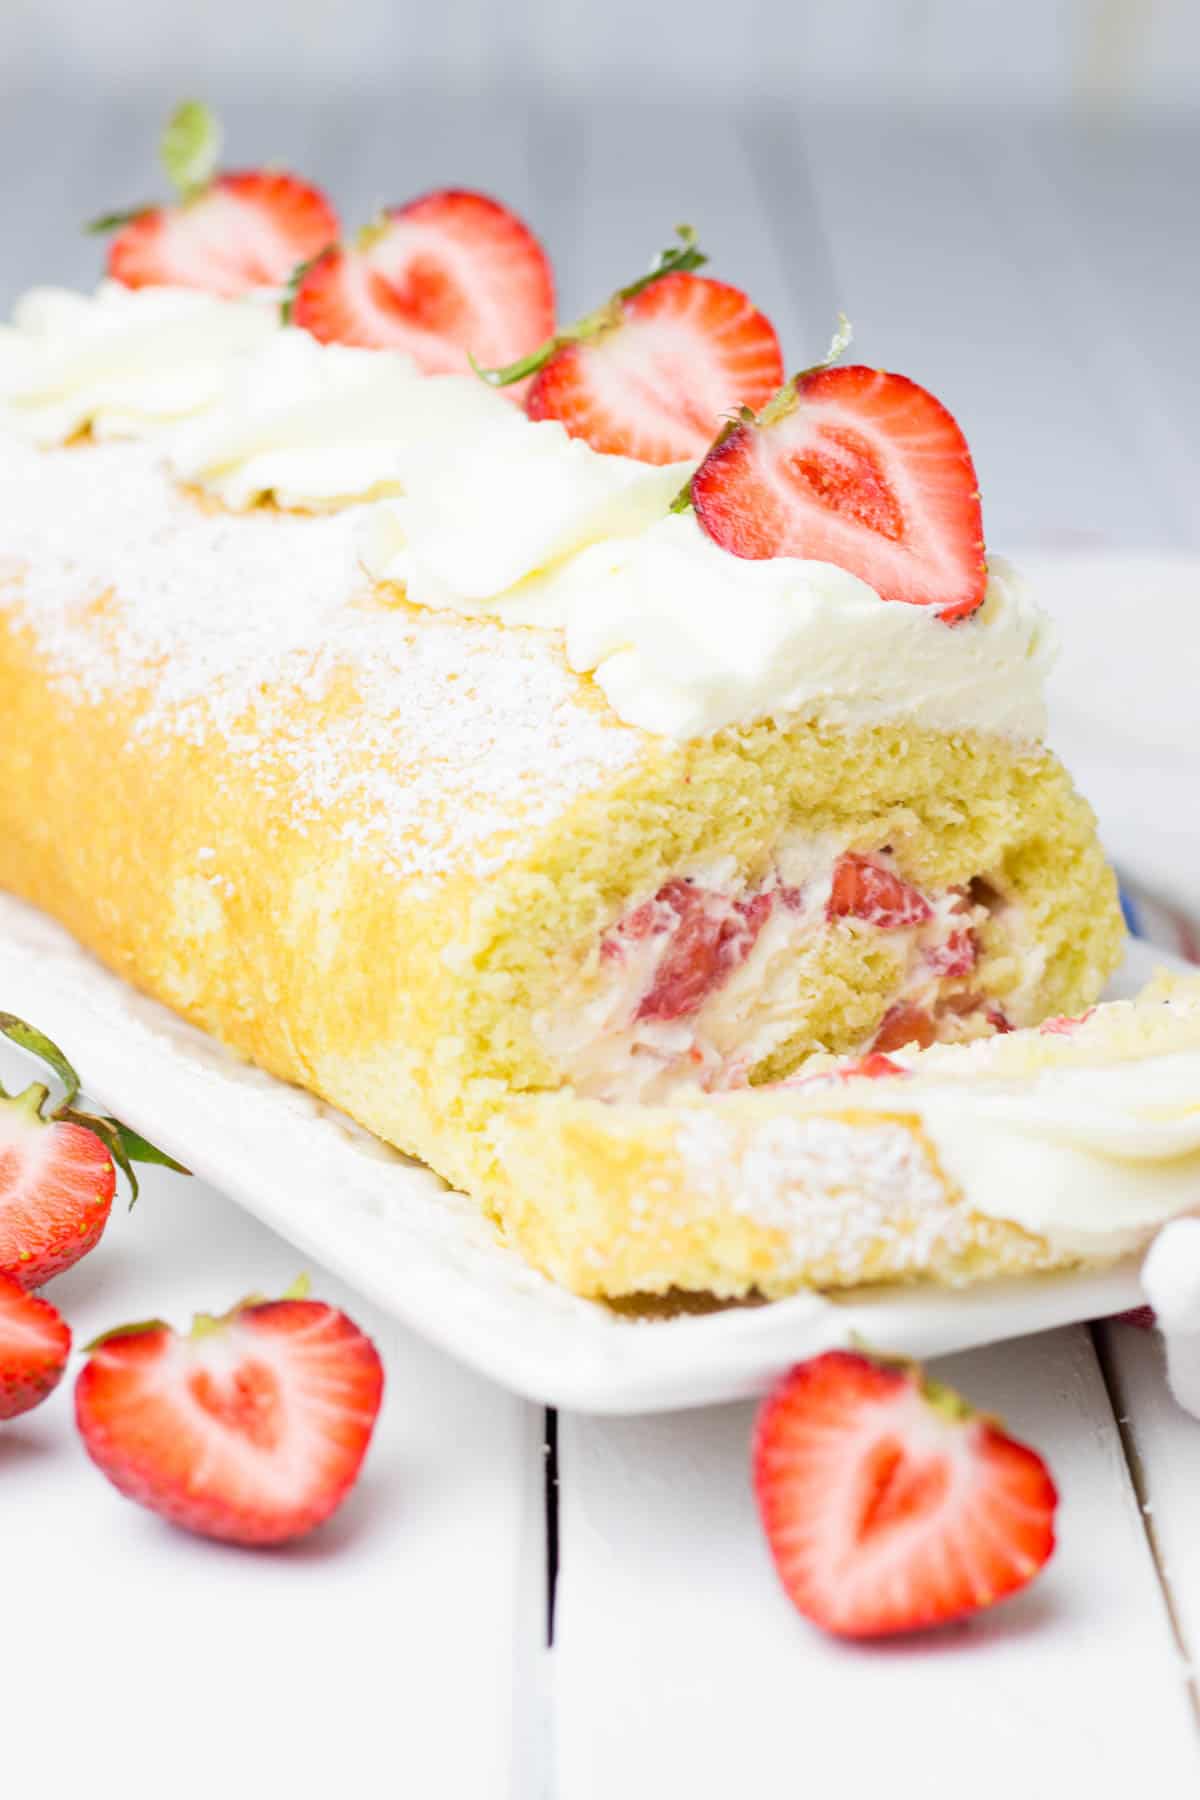 Cake roll filled with whipped cream and fresh strawberries.